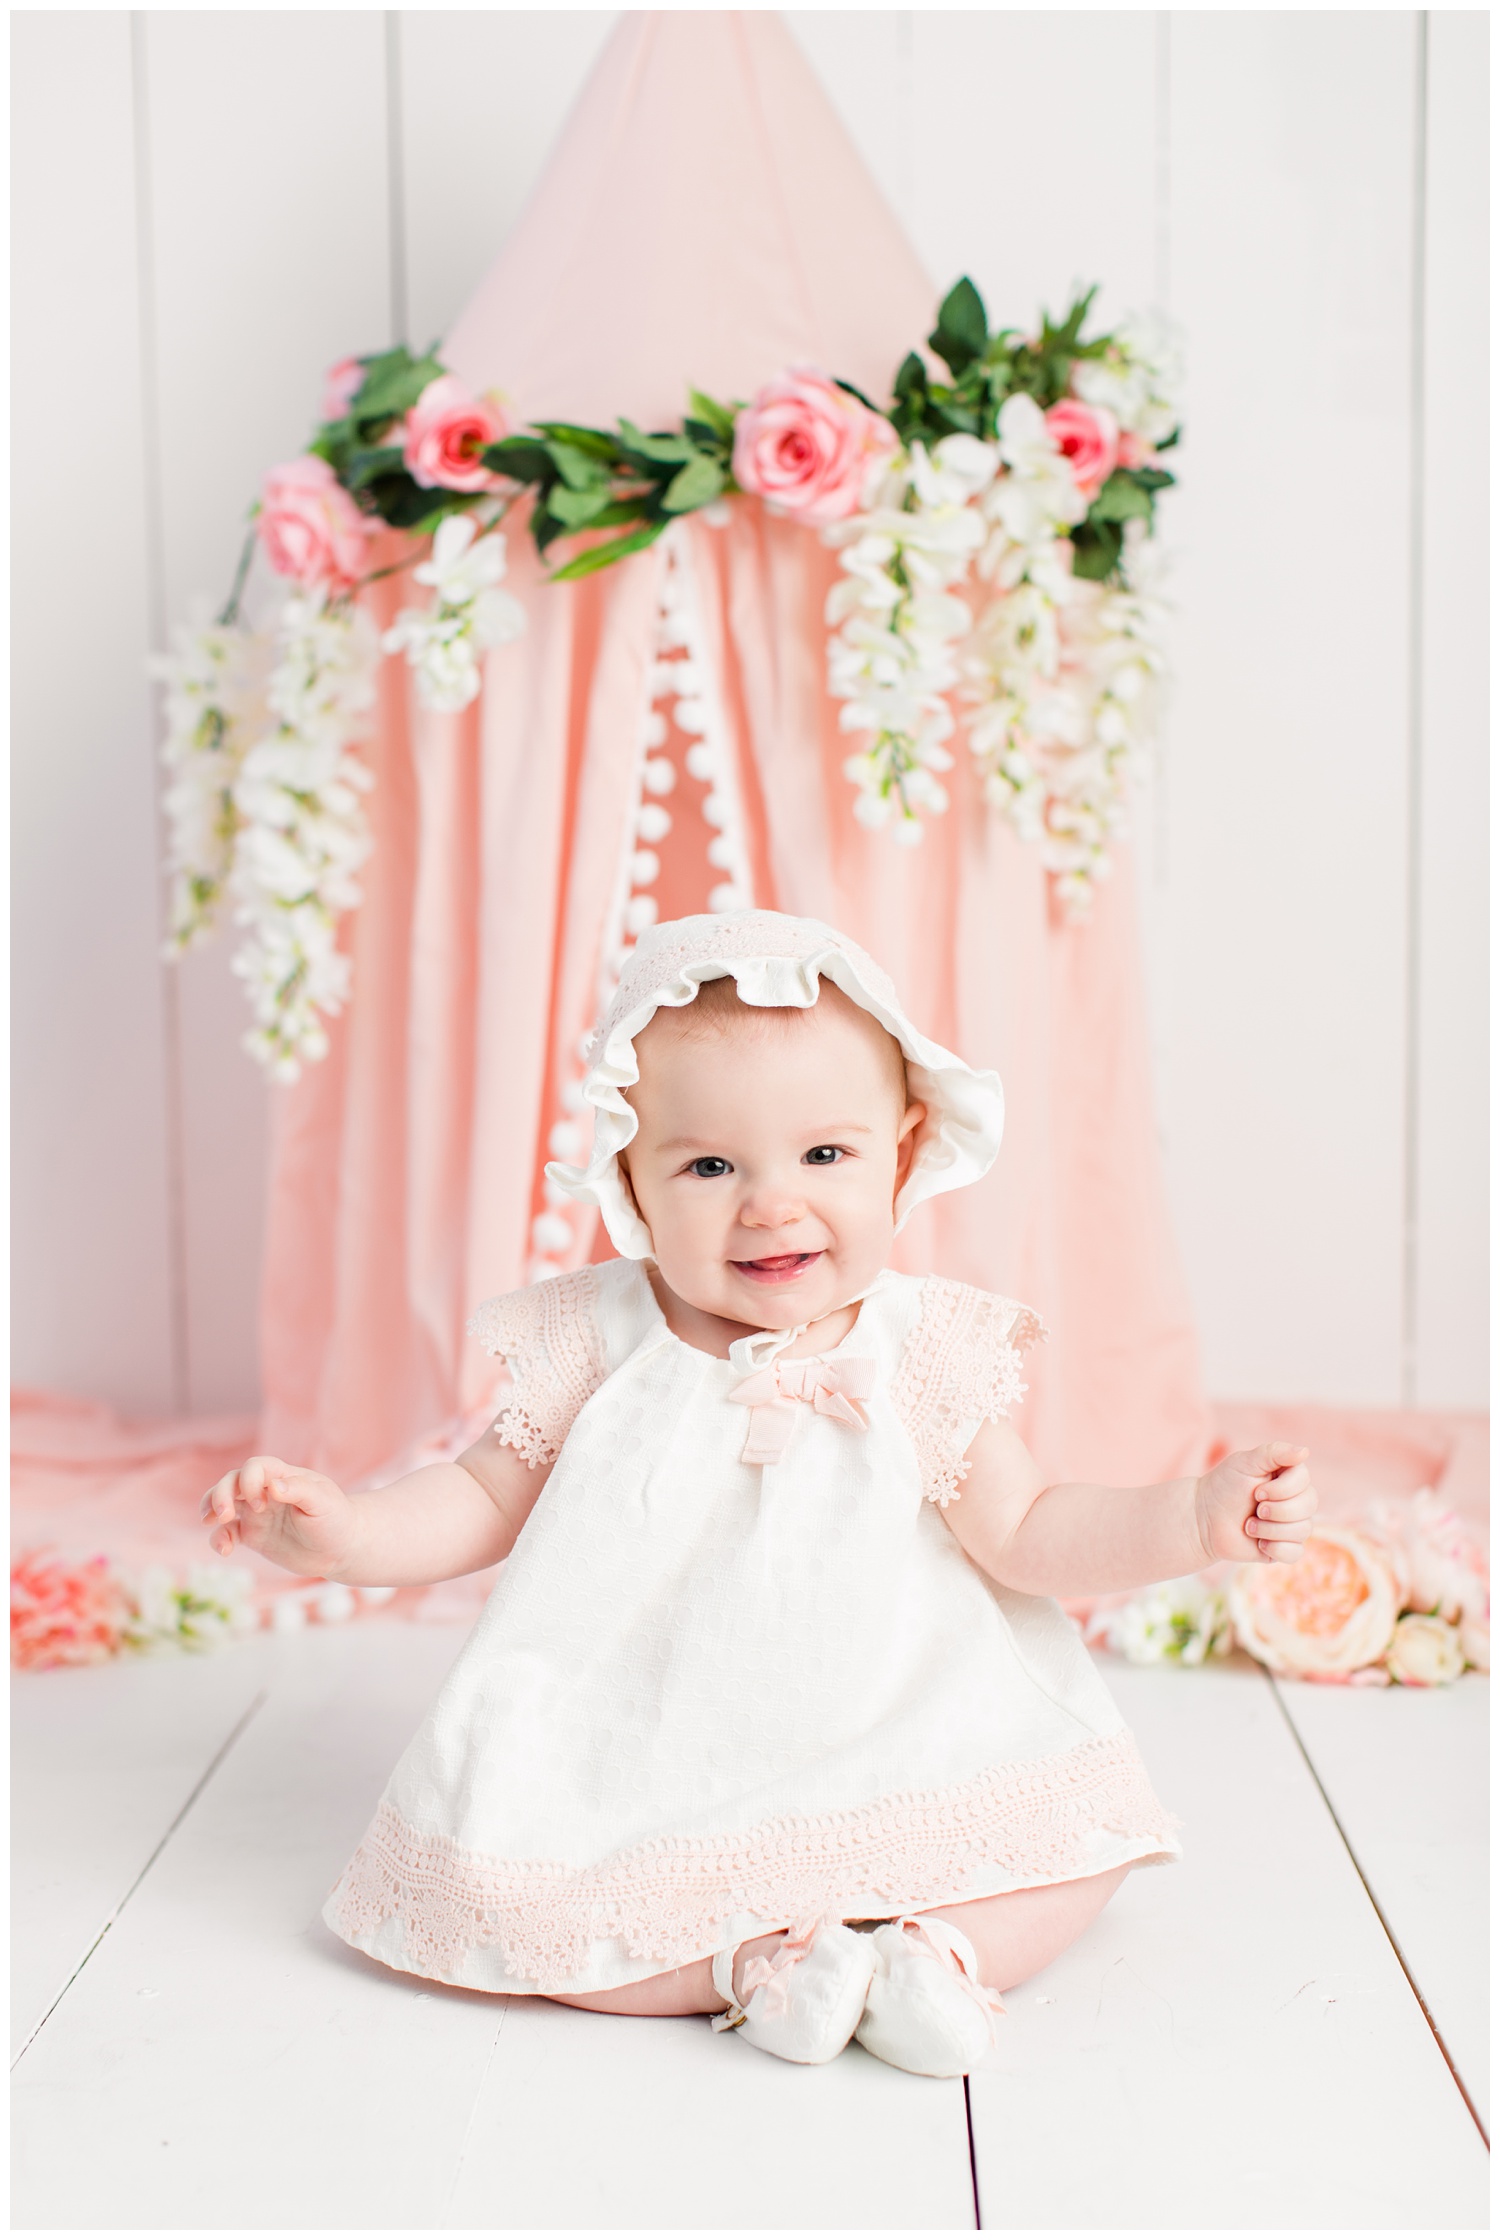 Baby Nora poses in a cream and pink babydoll dress and bonnet from TJ Maxx in front of a pink bed canopy decorated in florals.